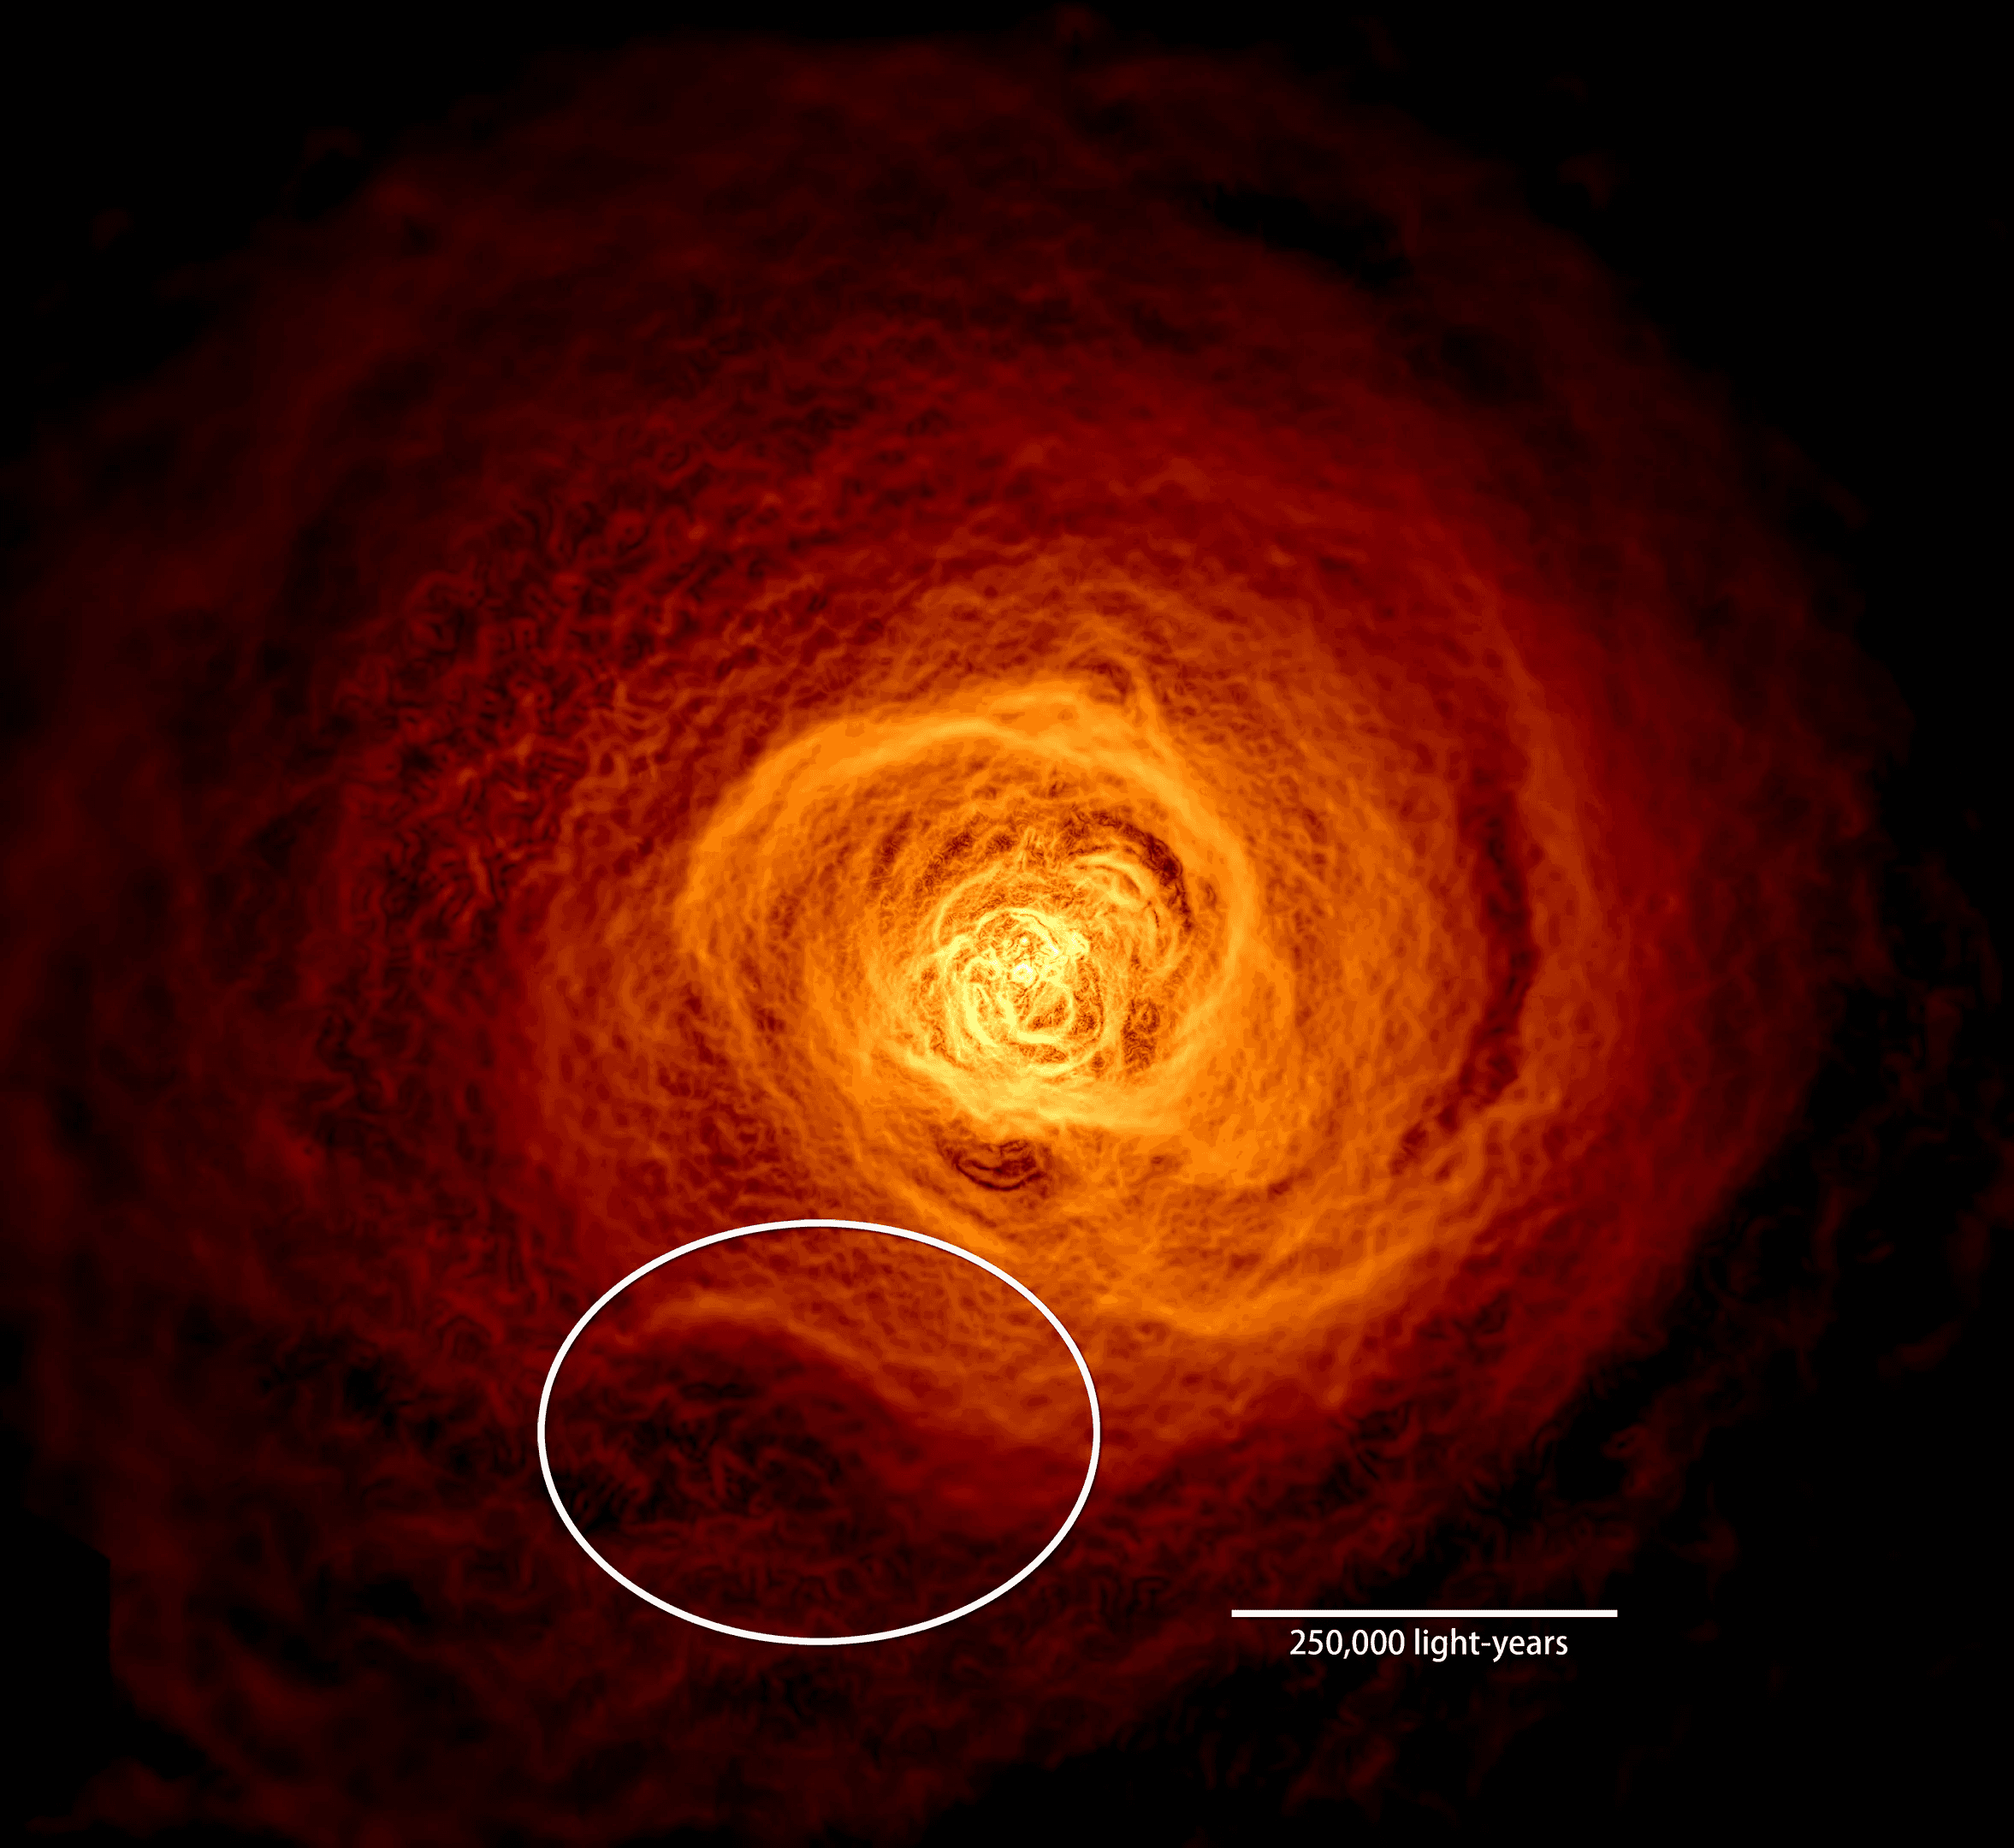 waves of gas are all wrapped around a central bright structure like a spiral